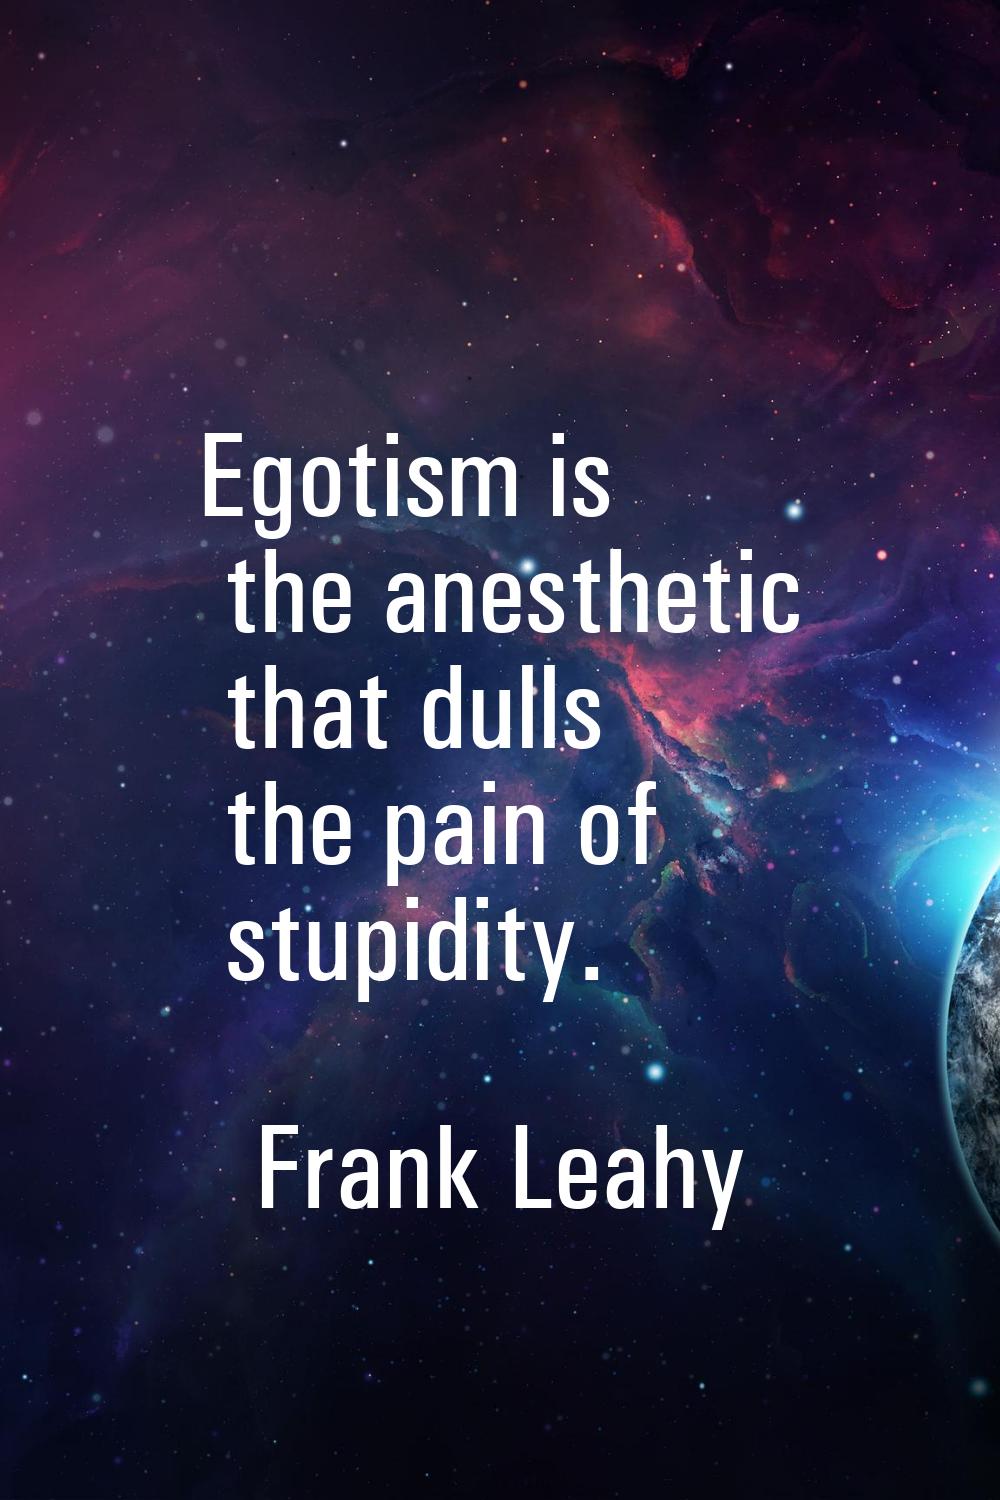 Egotism is the anesthetic that dulls the pain of stupidity.